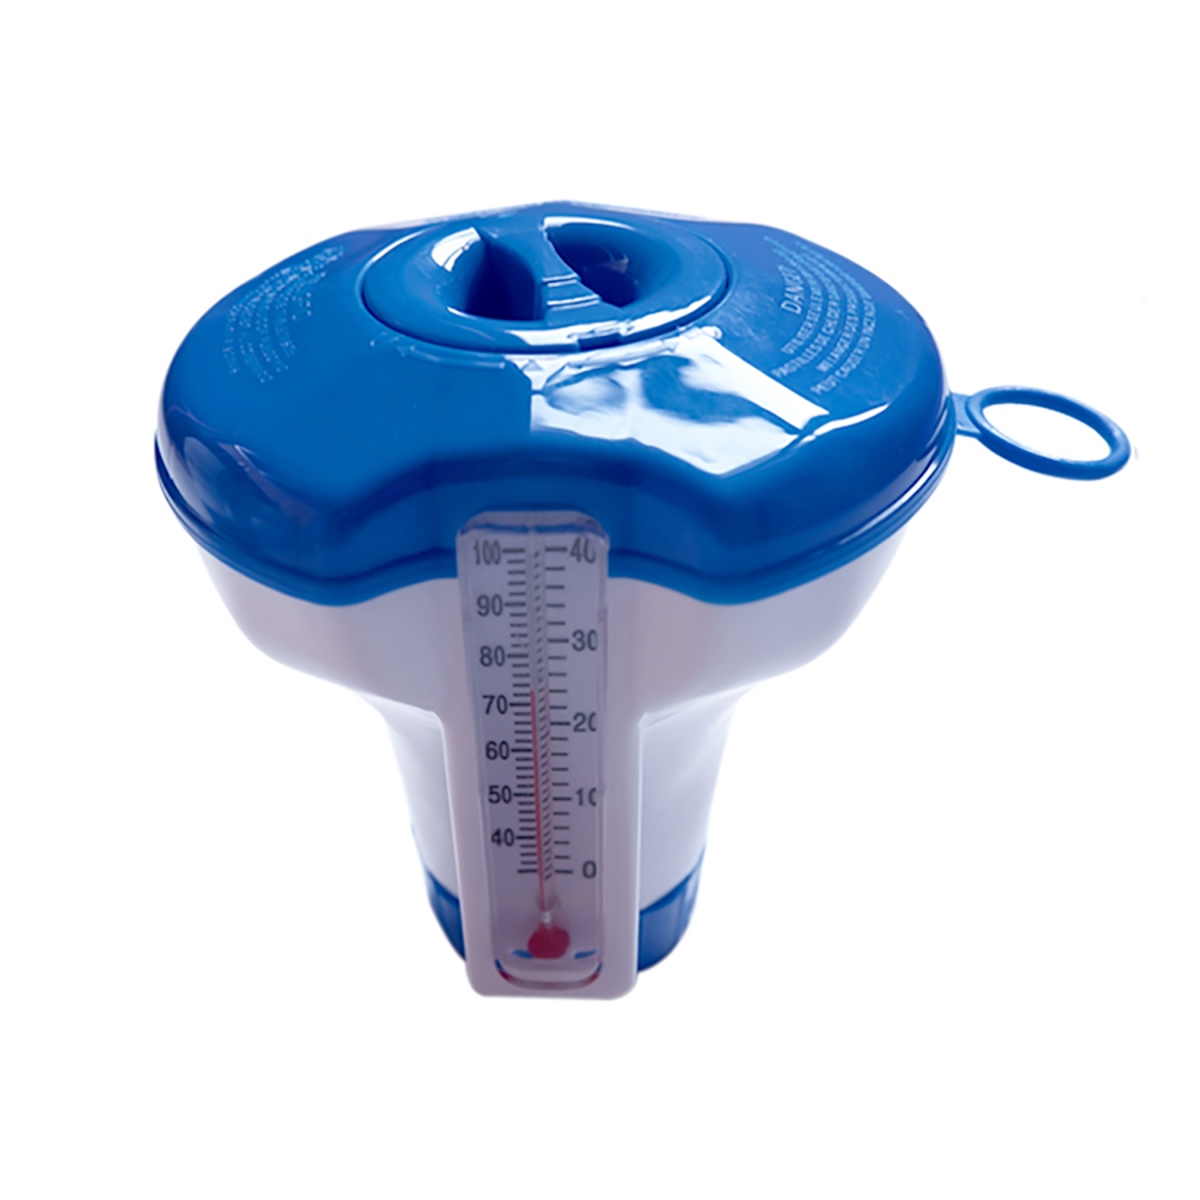 Smart MINI Chlorine Dispenser with thermometer, diameter 5”, blue, for quick up pools and whirlpools Smart MINI Chlorine Dispenser with thermometer, diameter 5”, blue, for quick up pools and whirlpools